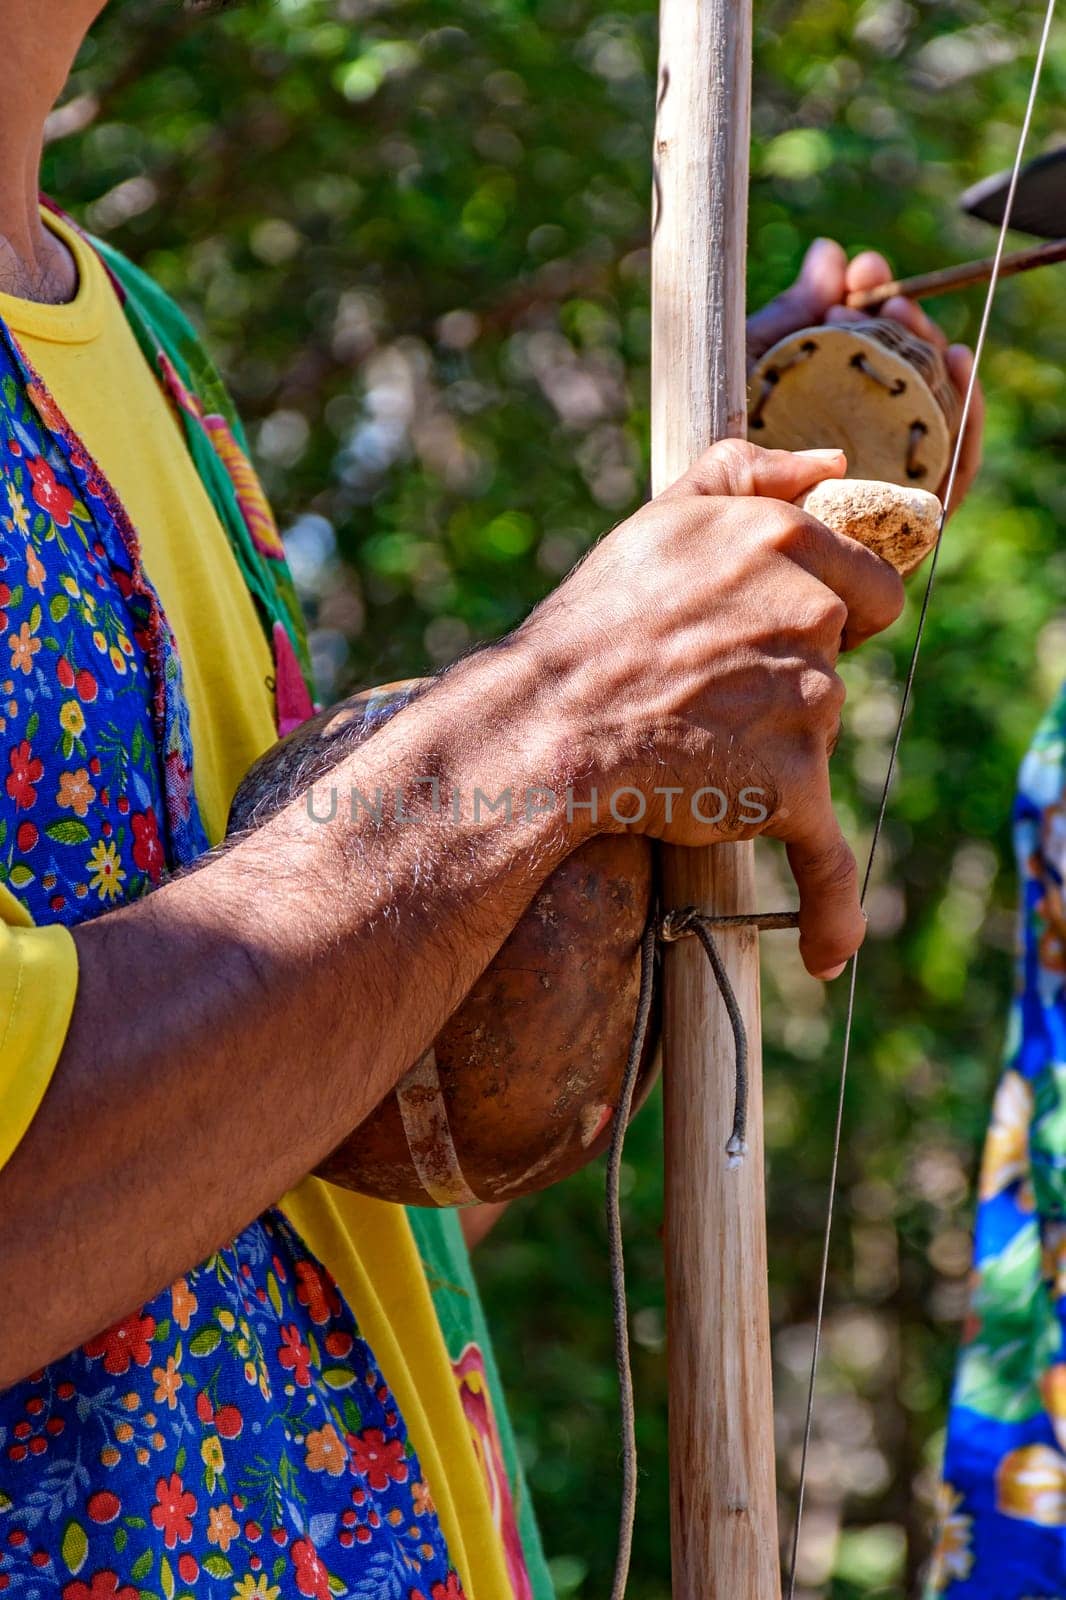 Berimbau player playing his instrument by Fred_Pinheiro